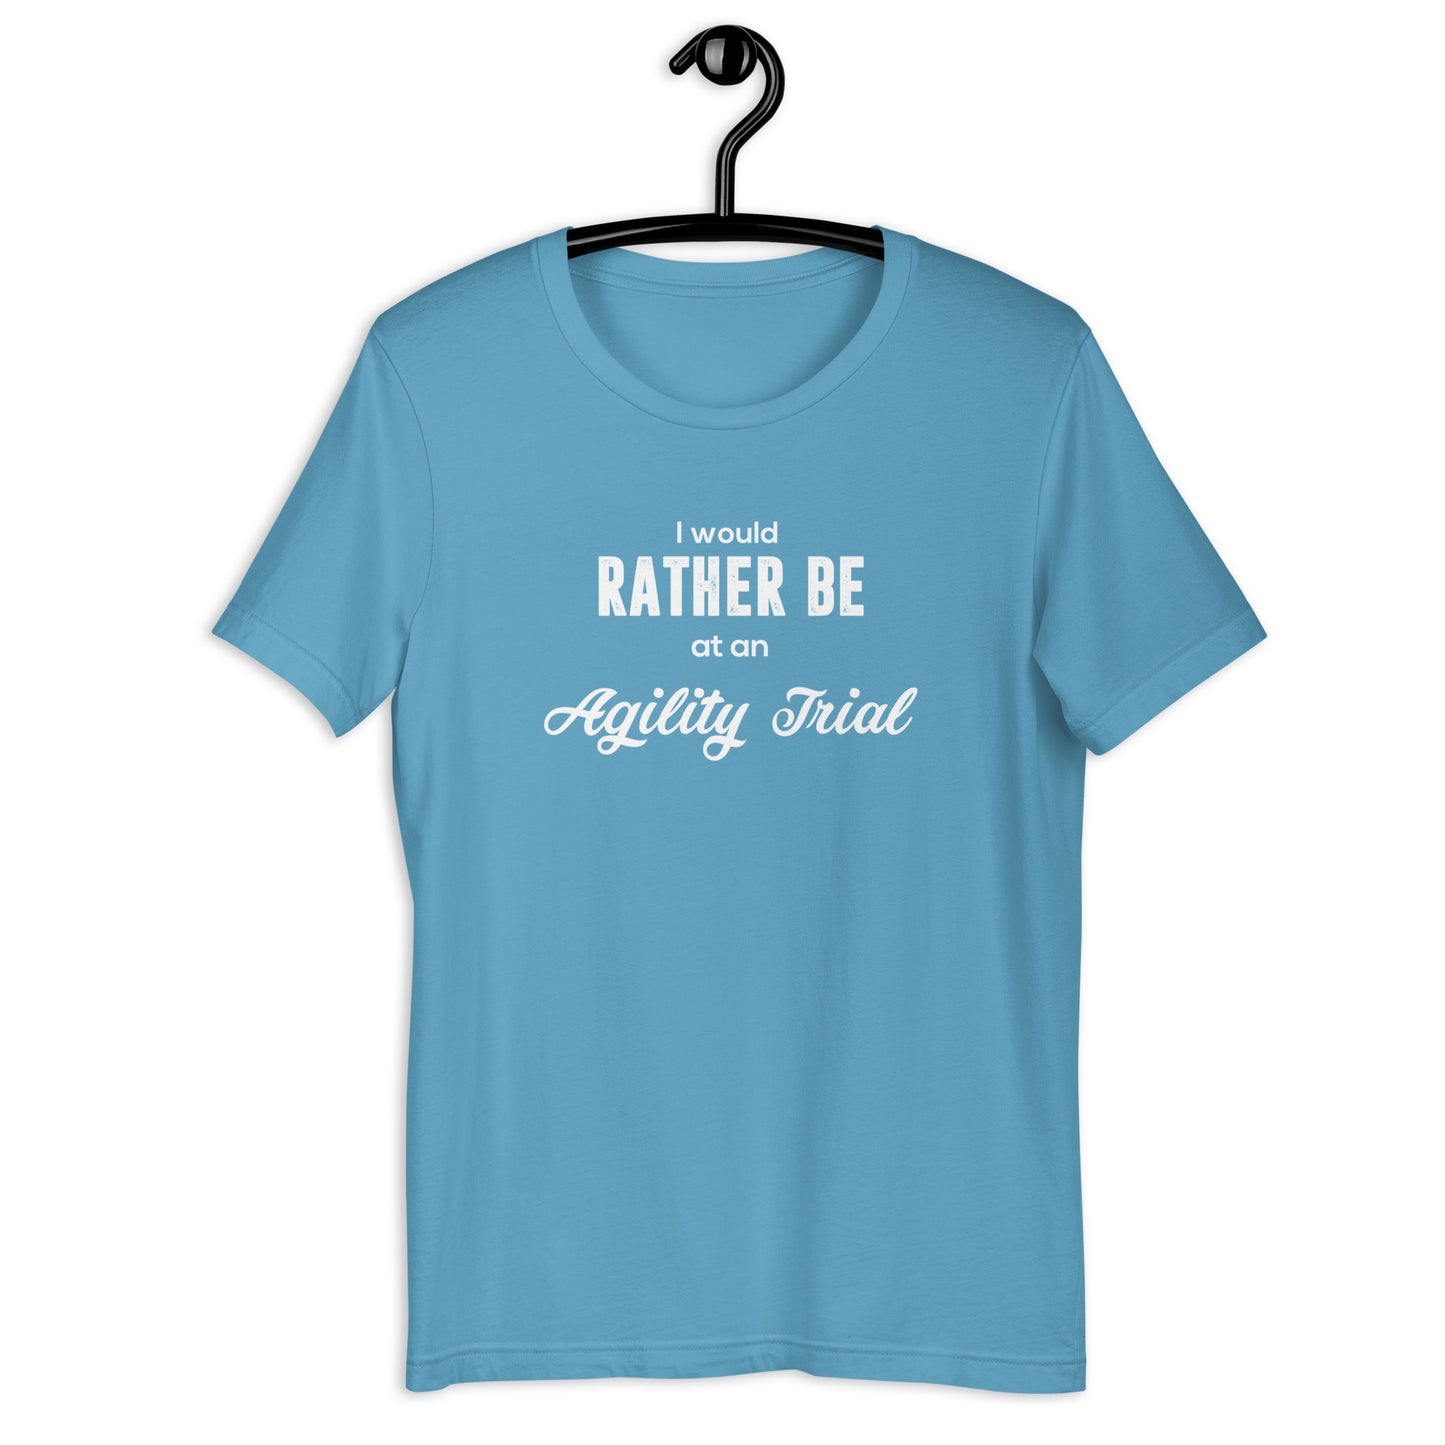 RATHER BE AT AGILITY - Unisex t-shirt